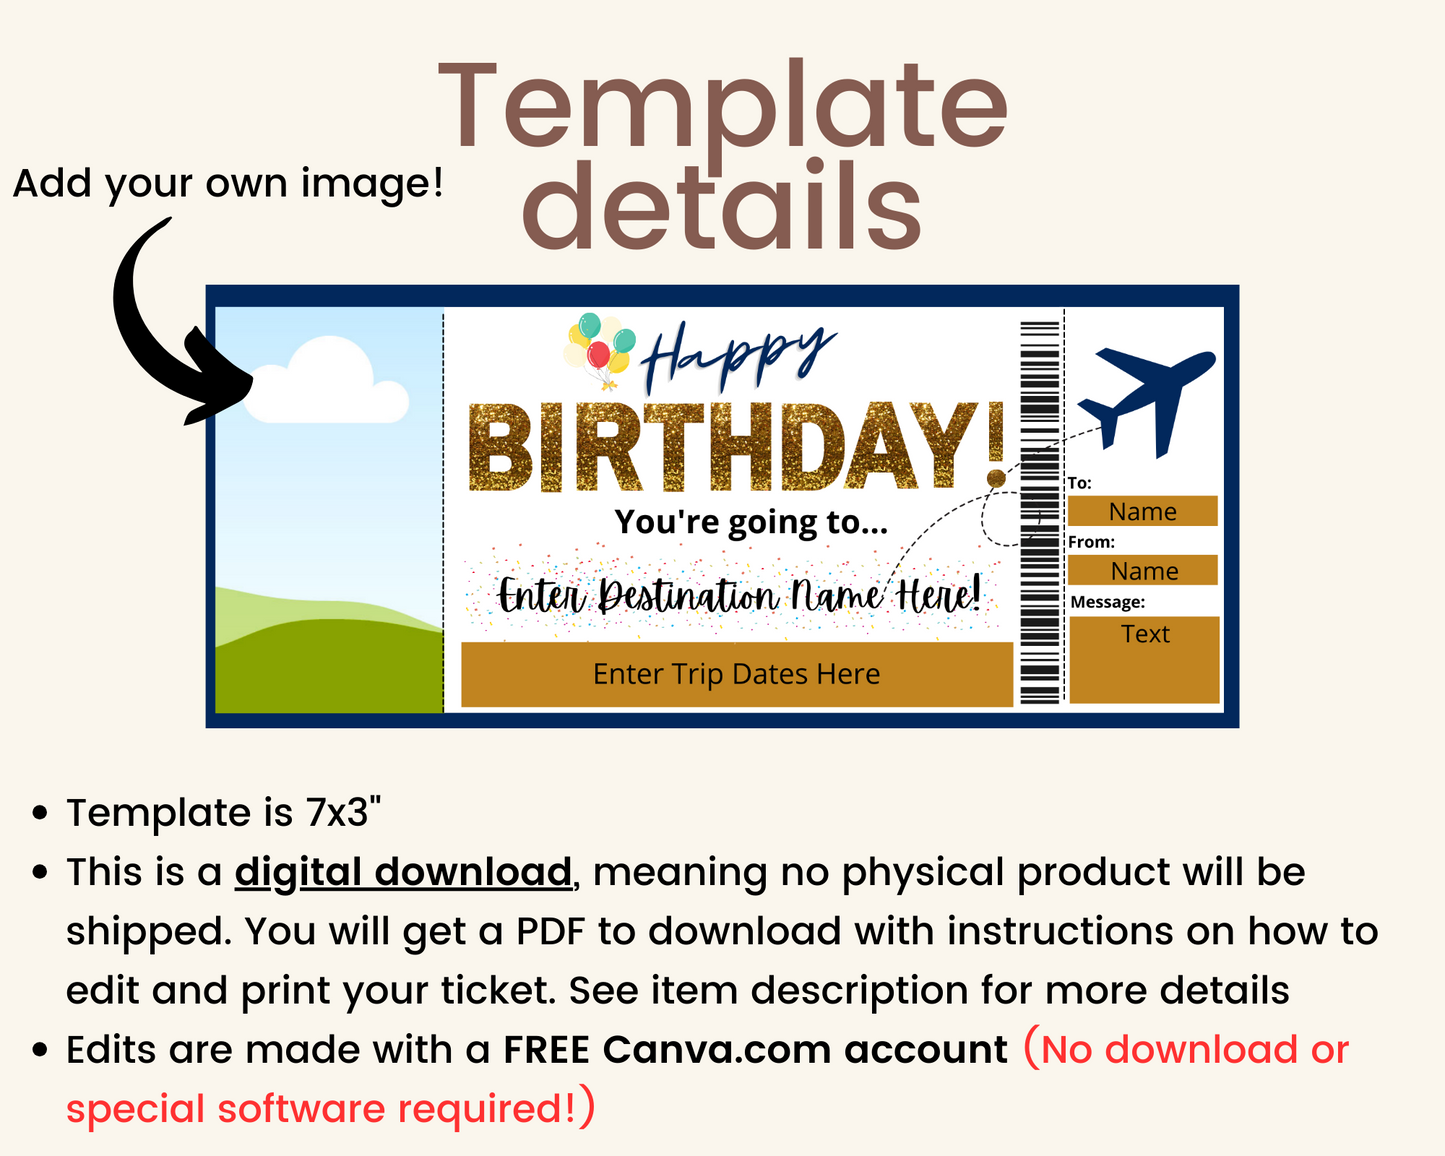 Happy Birthday Boarding Pass Template: Add your own image!